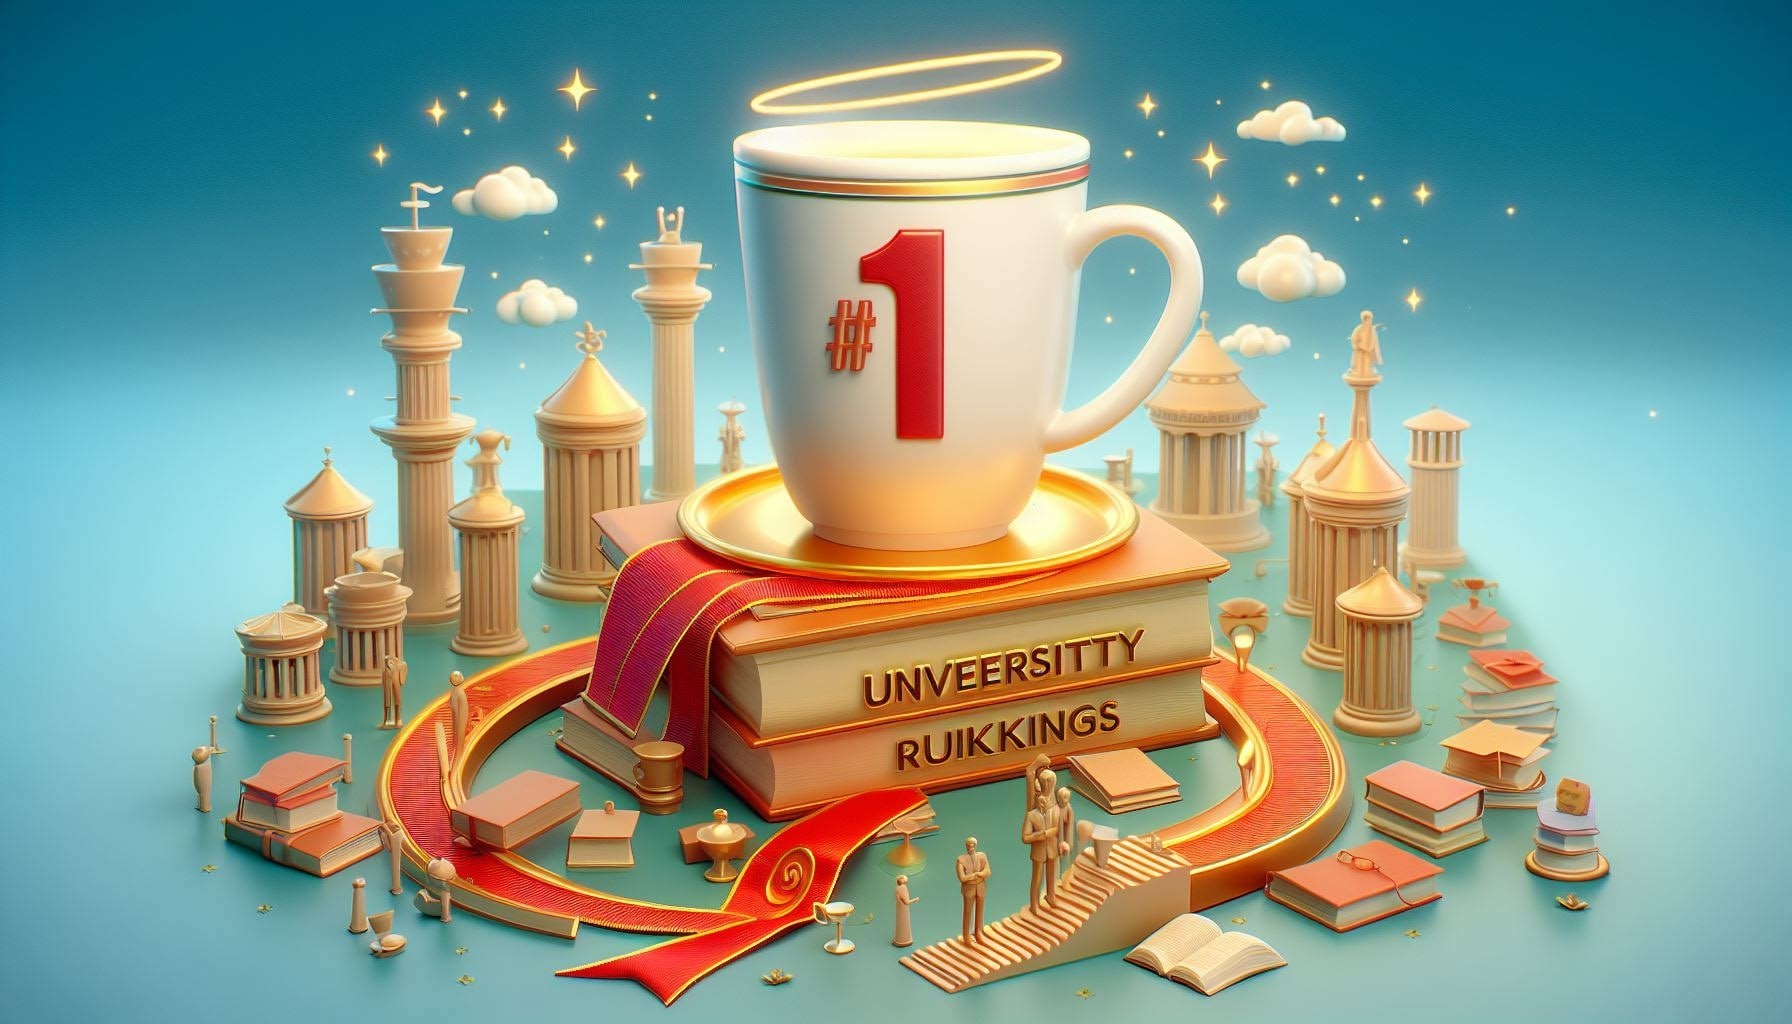 Do University Rankings Matter for PhD? IMAGE SHOWING A CUP OVER BOOKS AND HAS NUMBER 1 WRITTEN ON IT